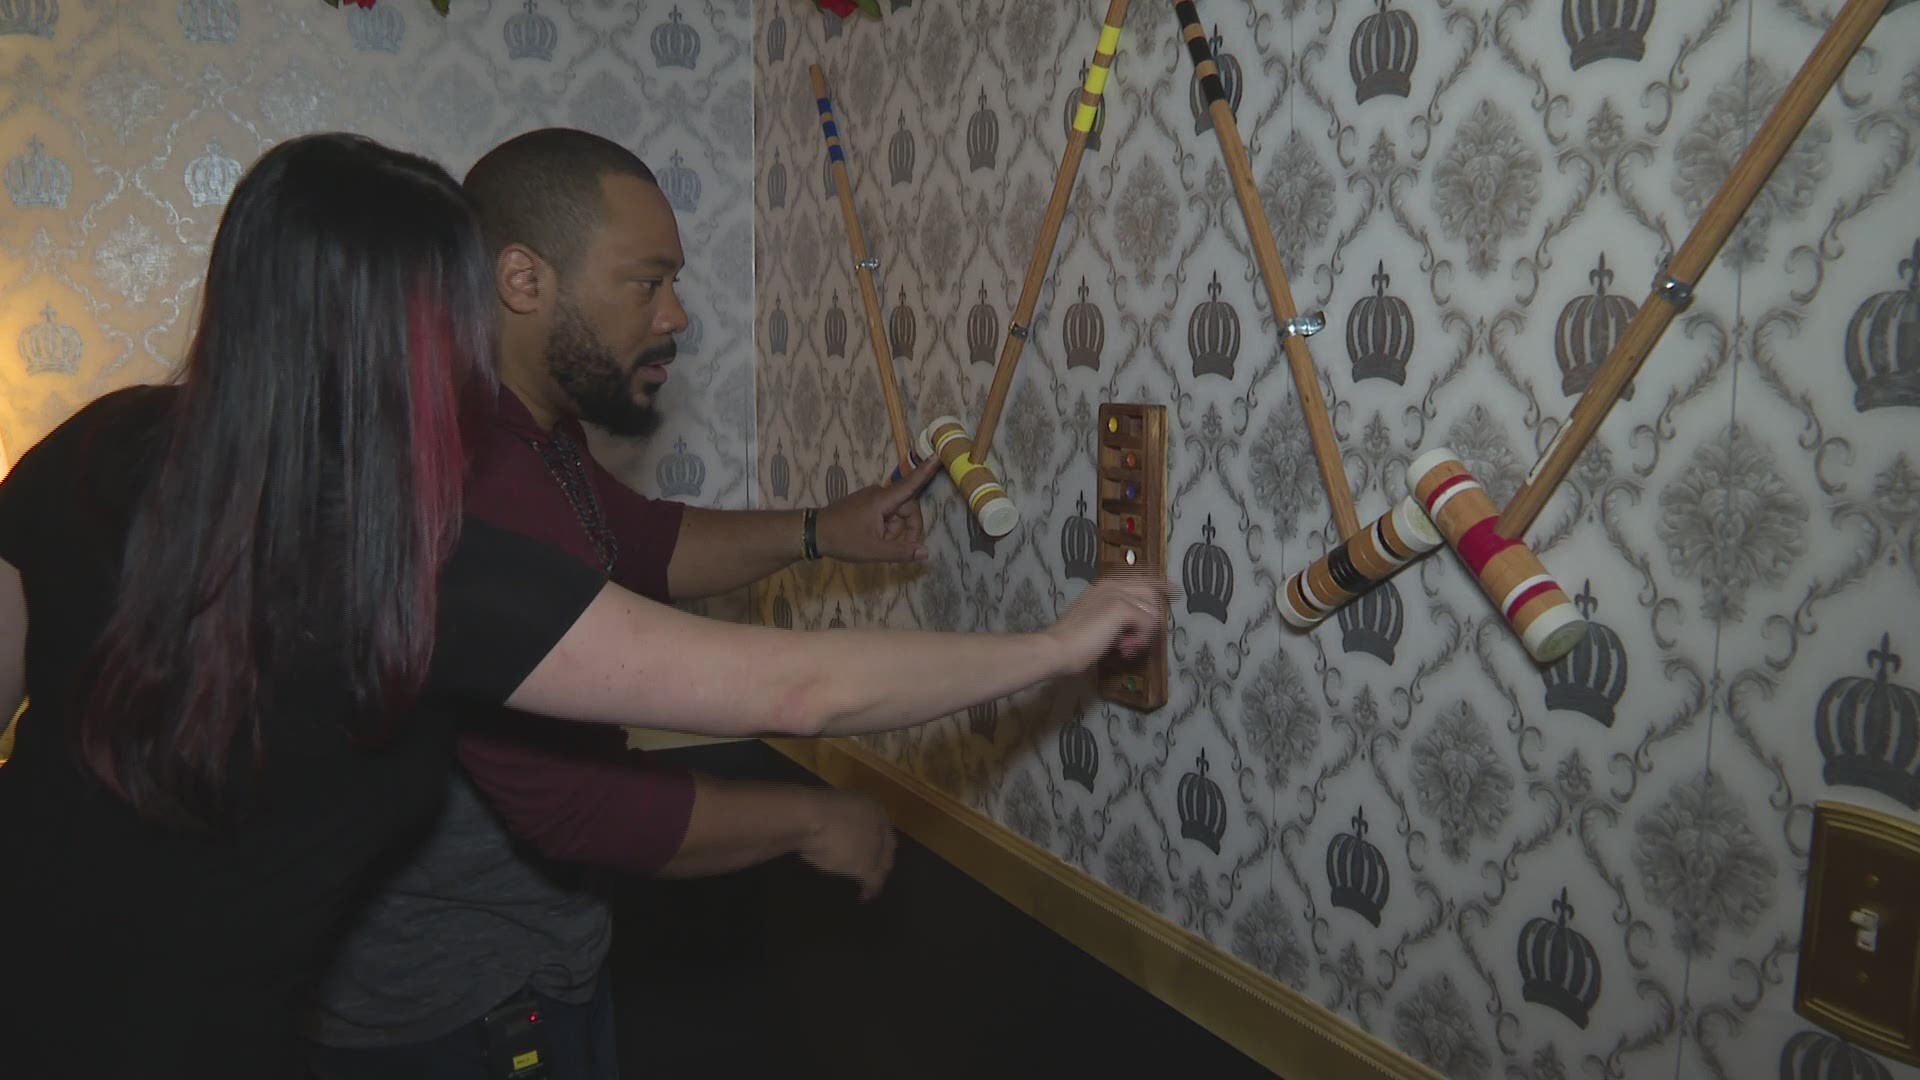 Tom Anderson opened Escape Room 207 in Topsham in memory of his late wife, Rebecca Anderson.